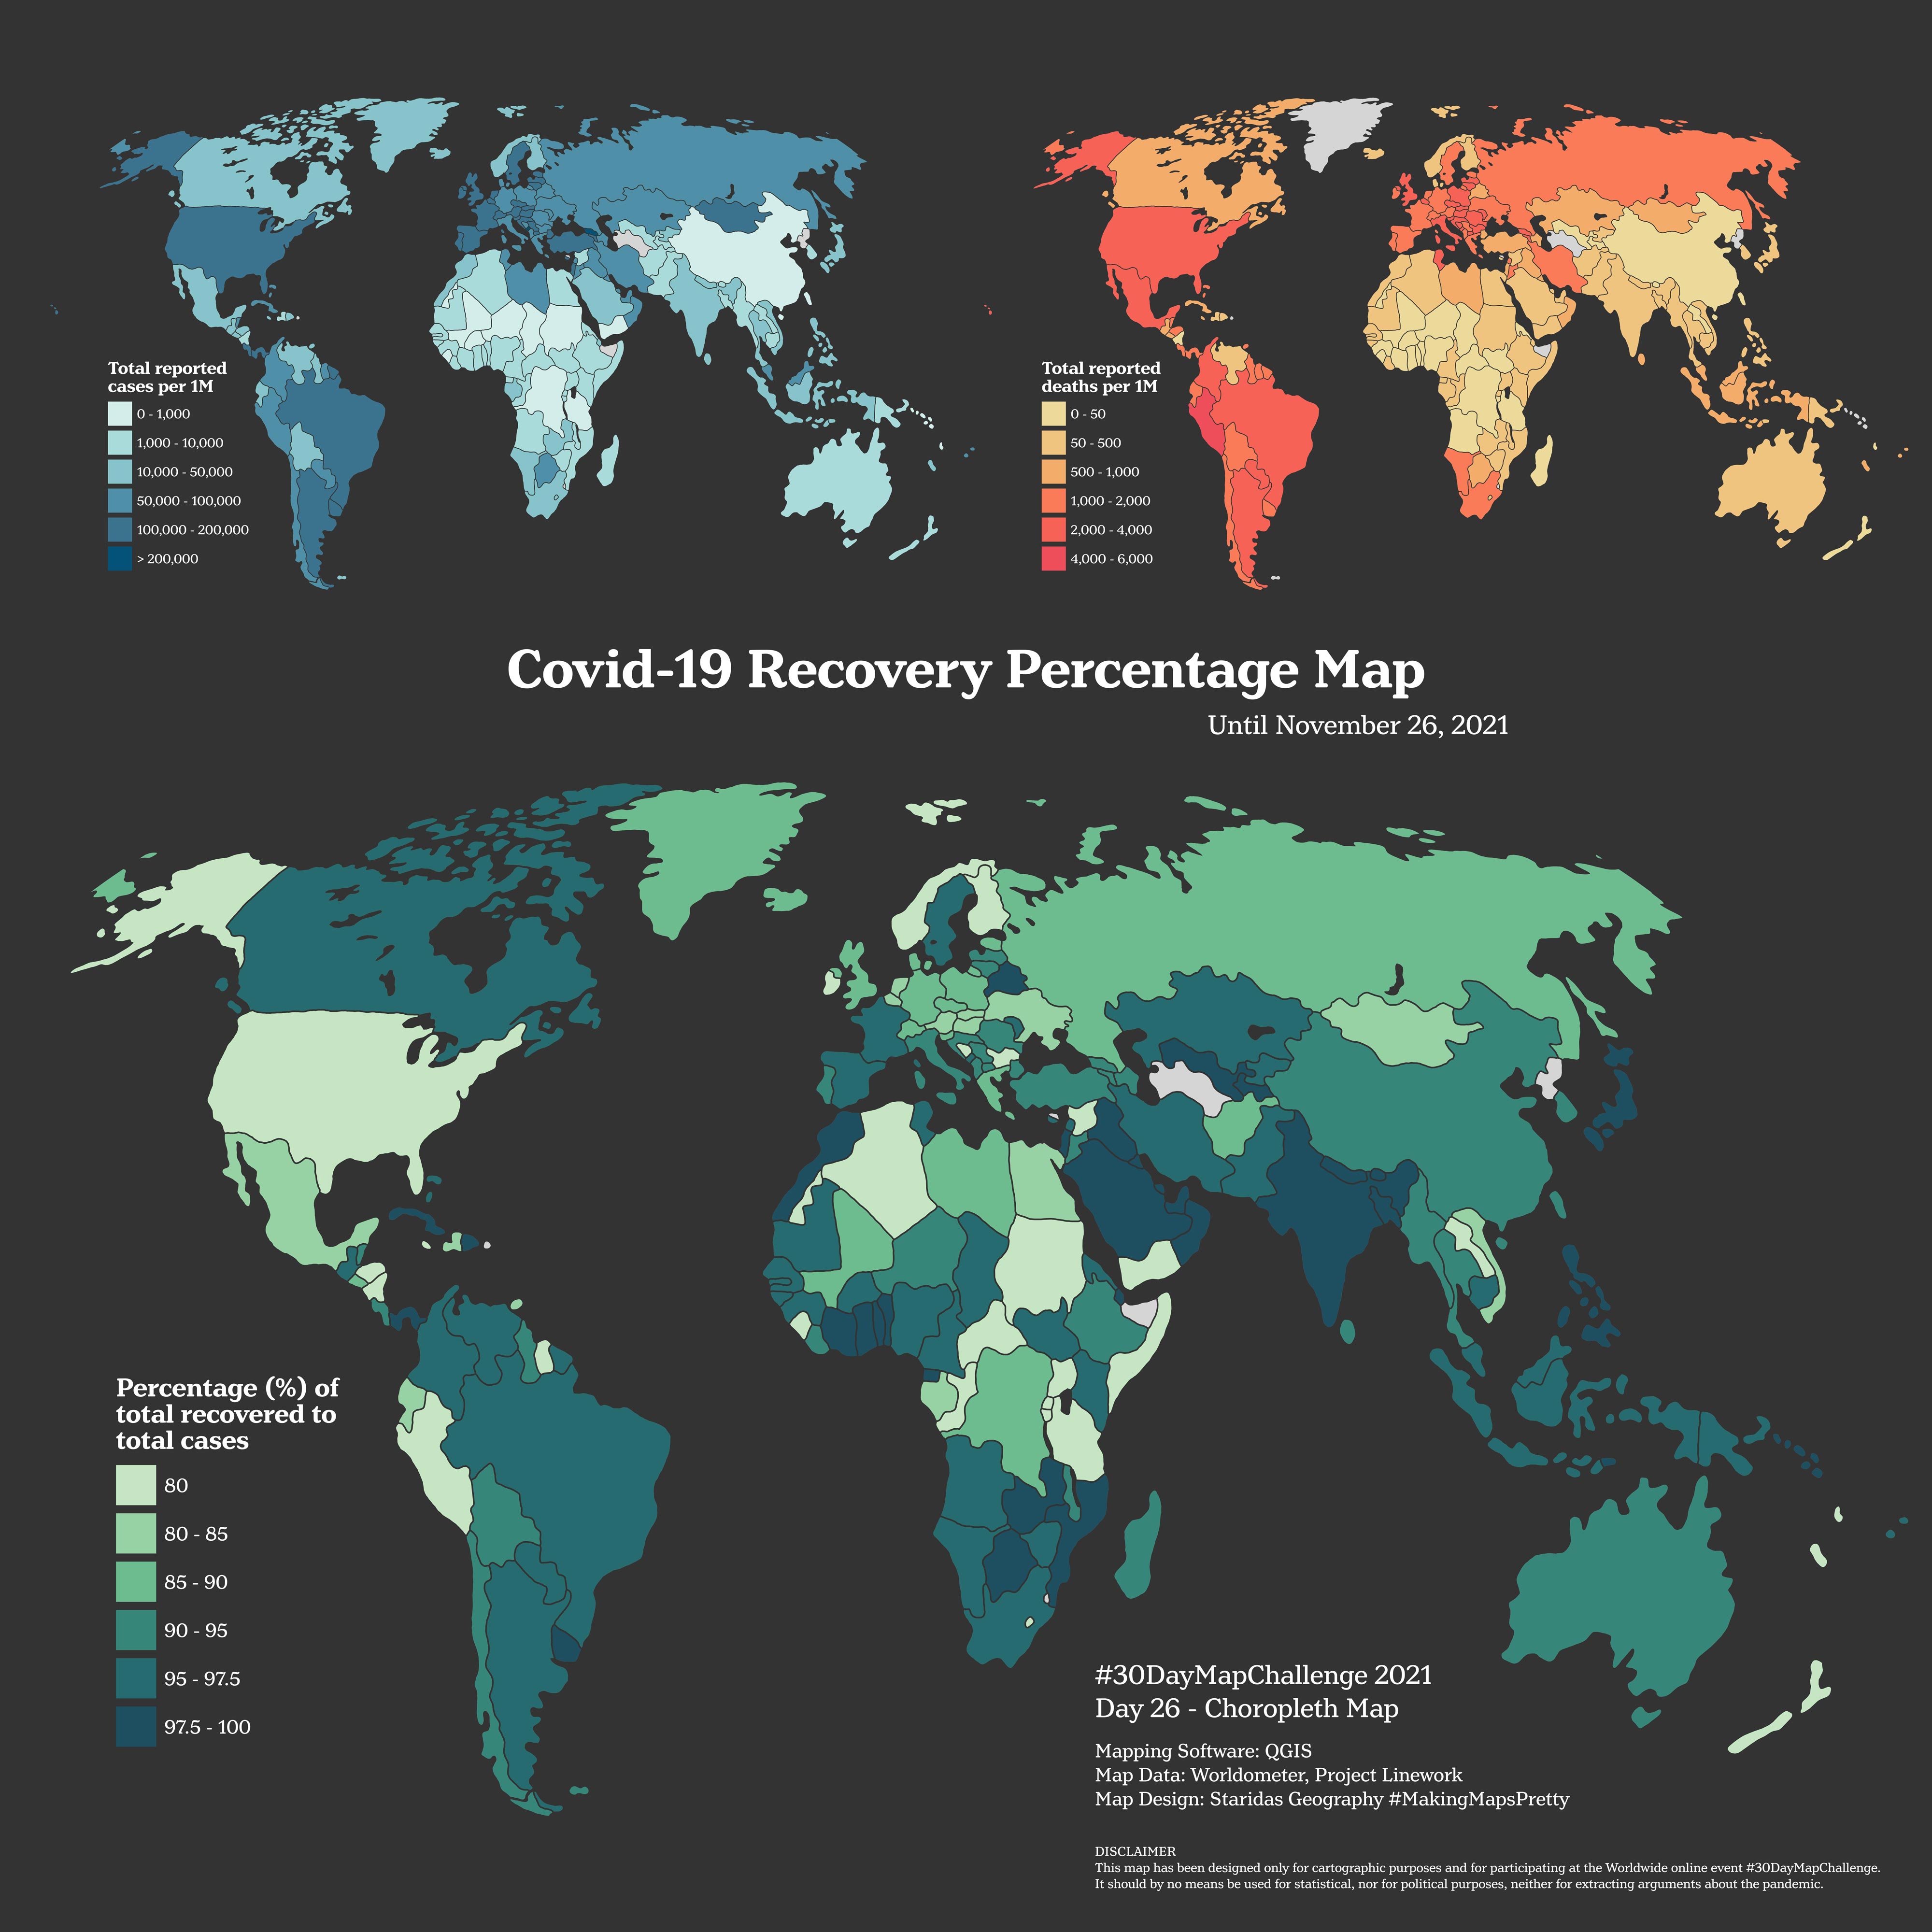 Covid-19 Recovery Percentage Map